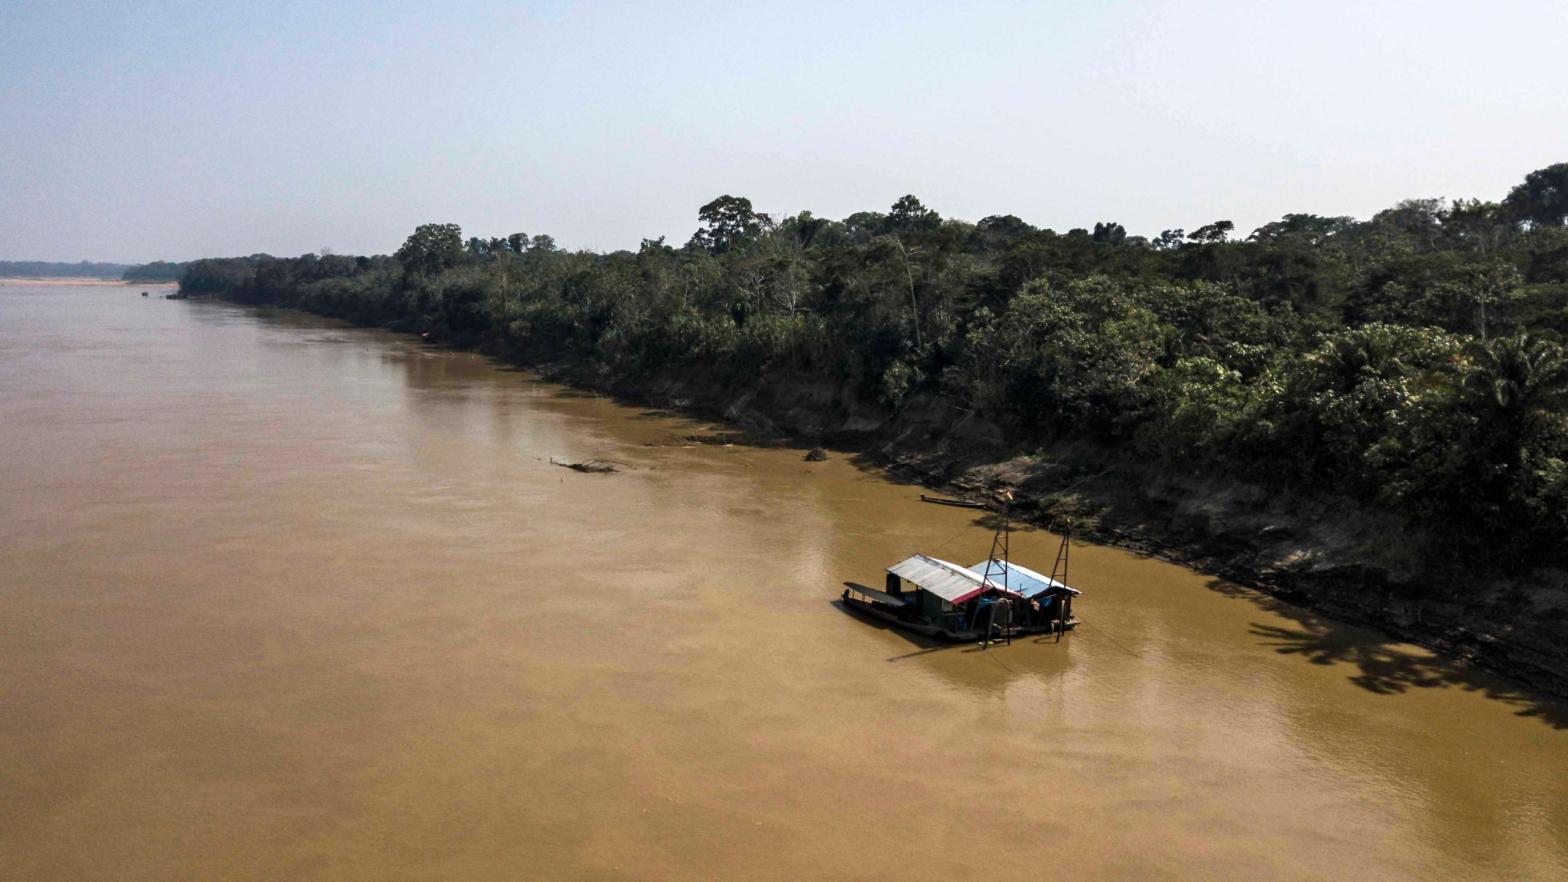 Madre de Dios River in Bolivia (Photo: LIDIA PEDRO / AFP, Getty Images)